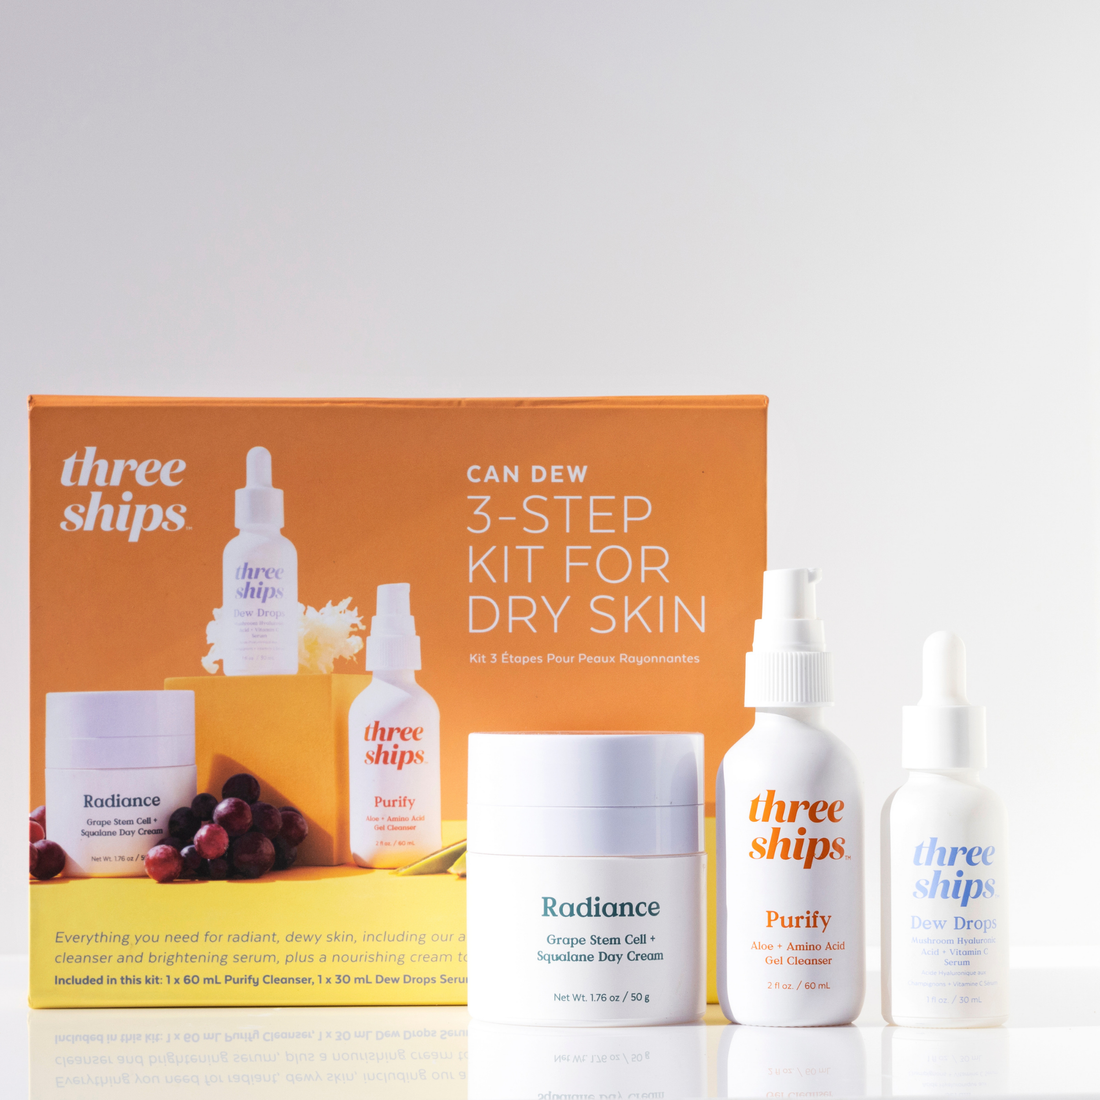 Can Dew 3-Step Kit for Glowing Skin (3 full-size products)